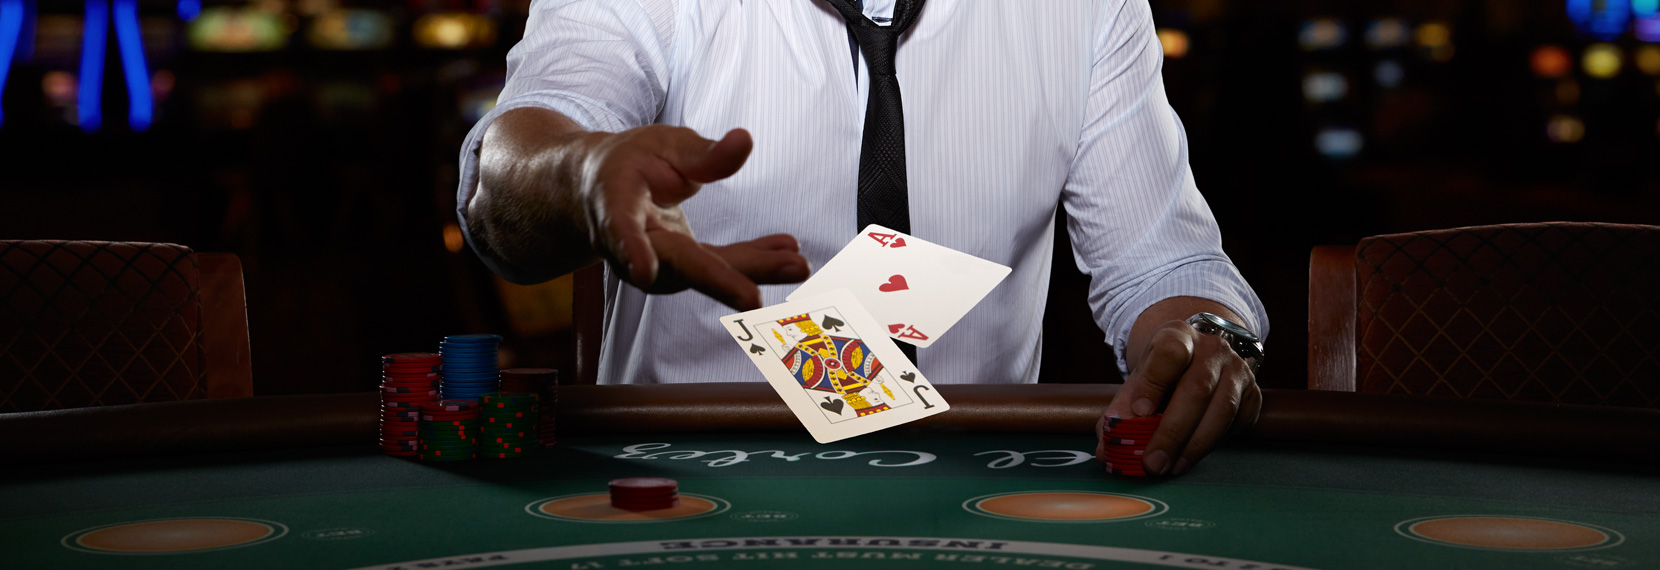 live casino blackjack with player and casino cards at table